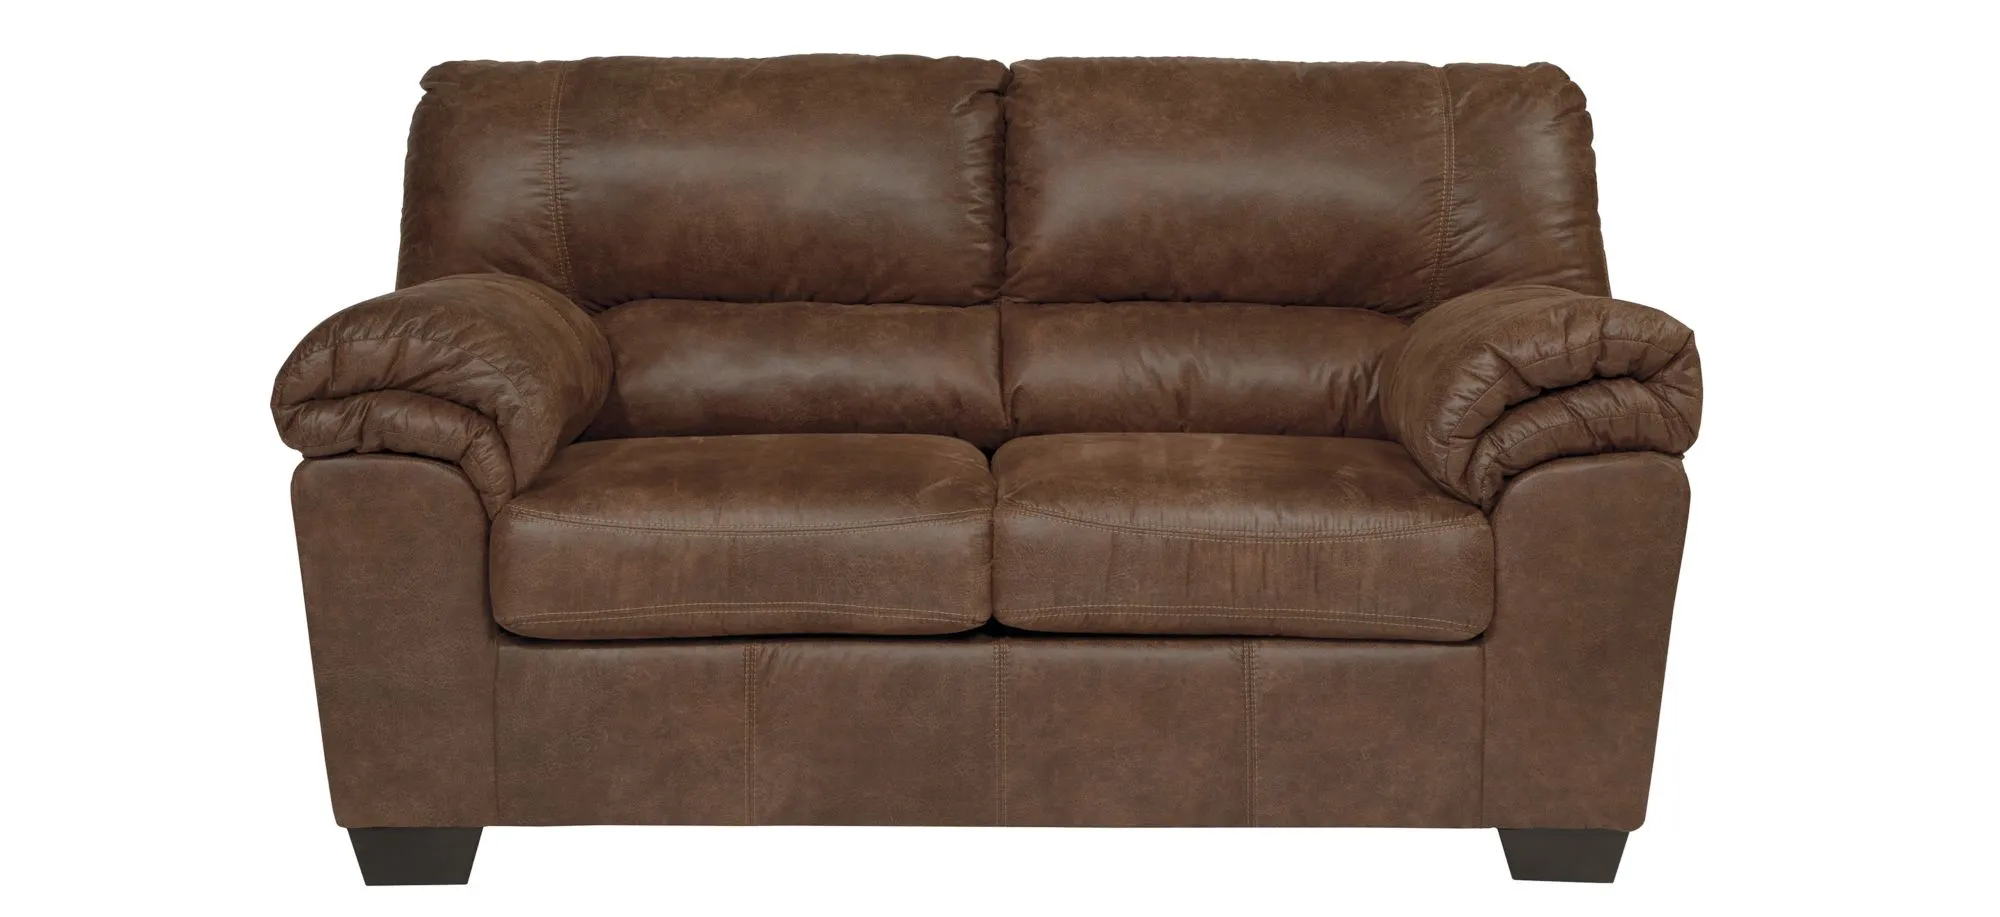 Livingston Leather-Look Loveseat in Brown by Ashley Furniture